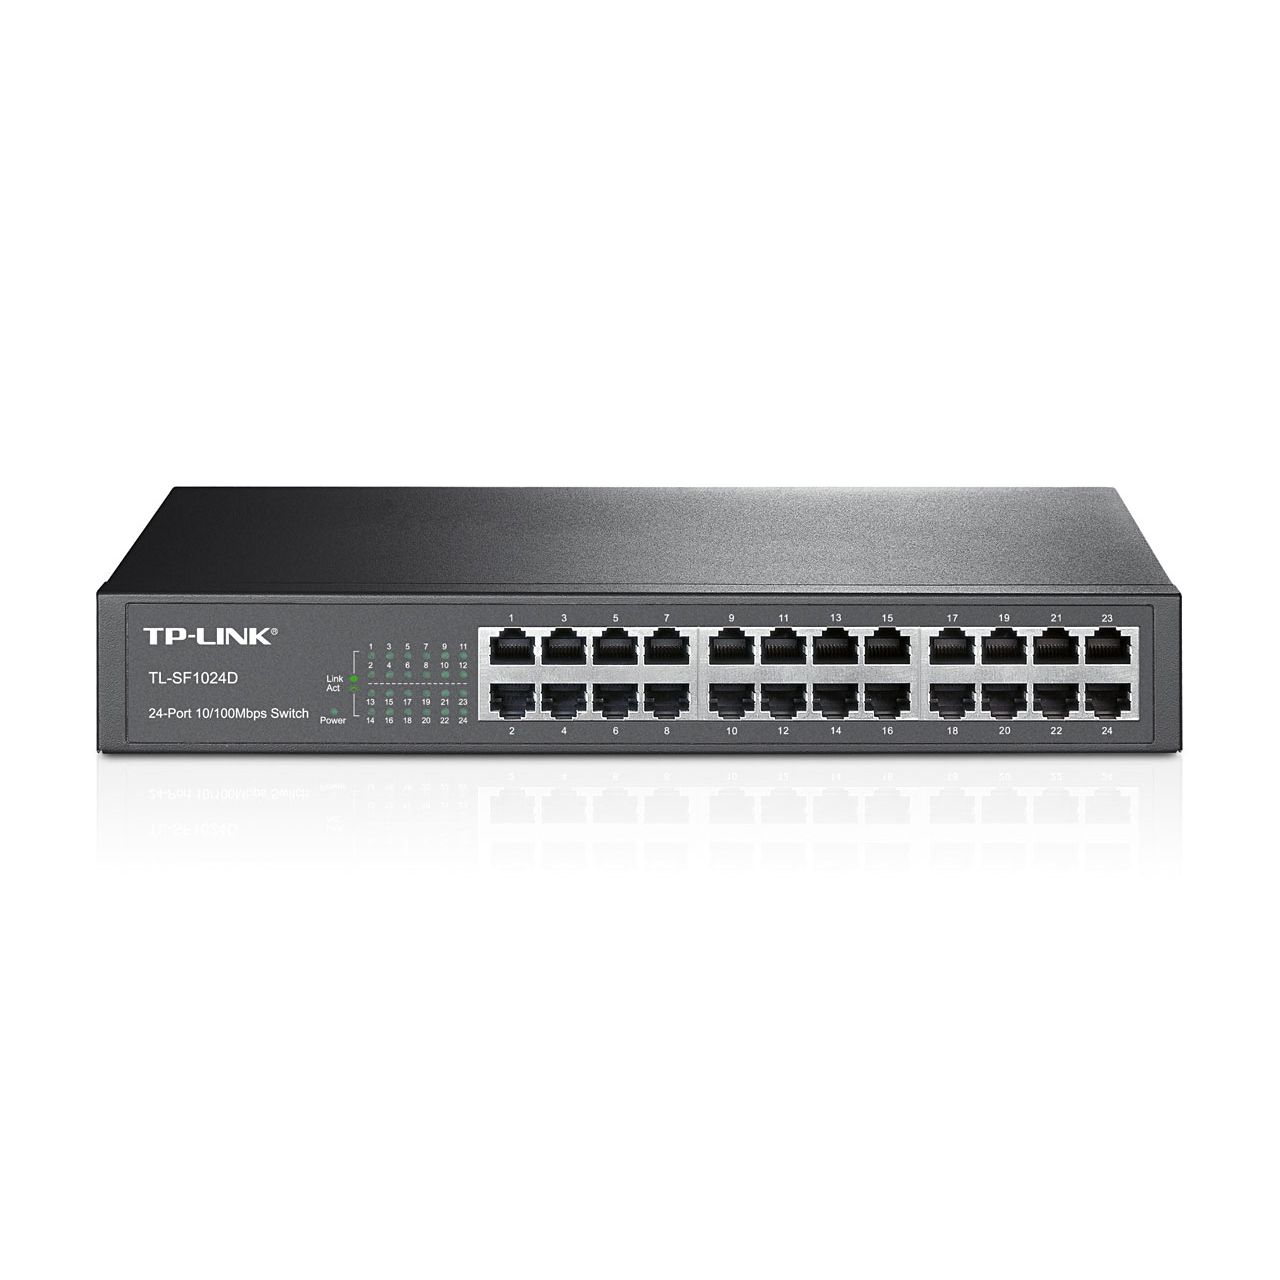 Switch 24 ports 10/100Mbps TL-SF1024D TP-LINK